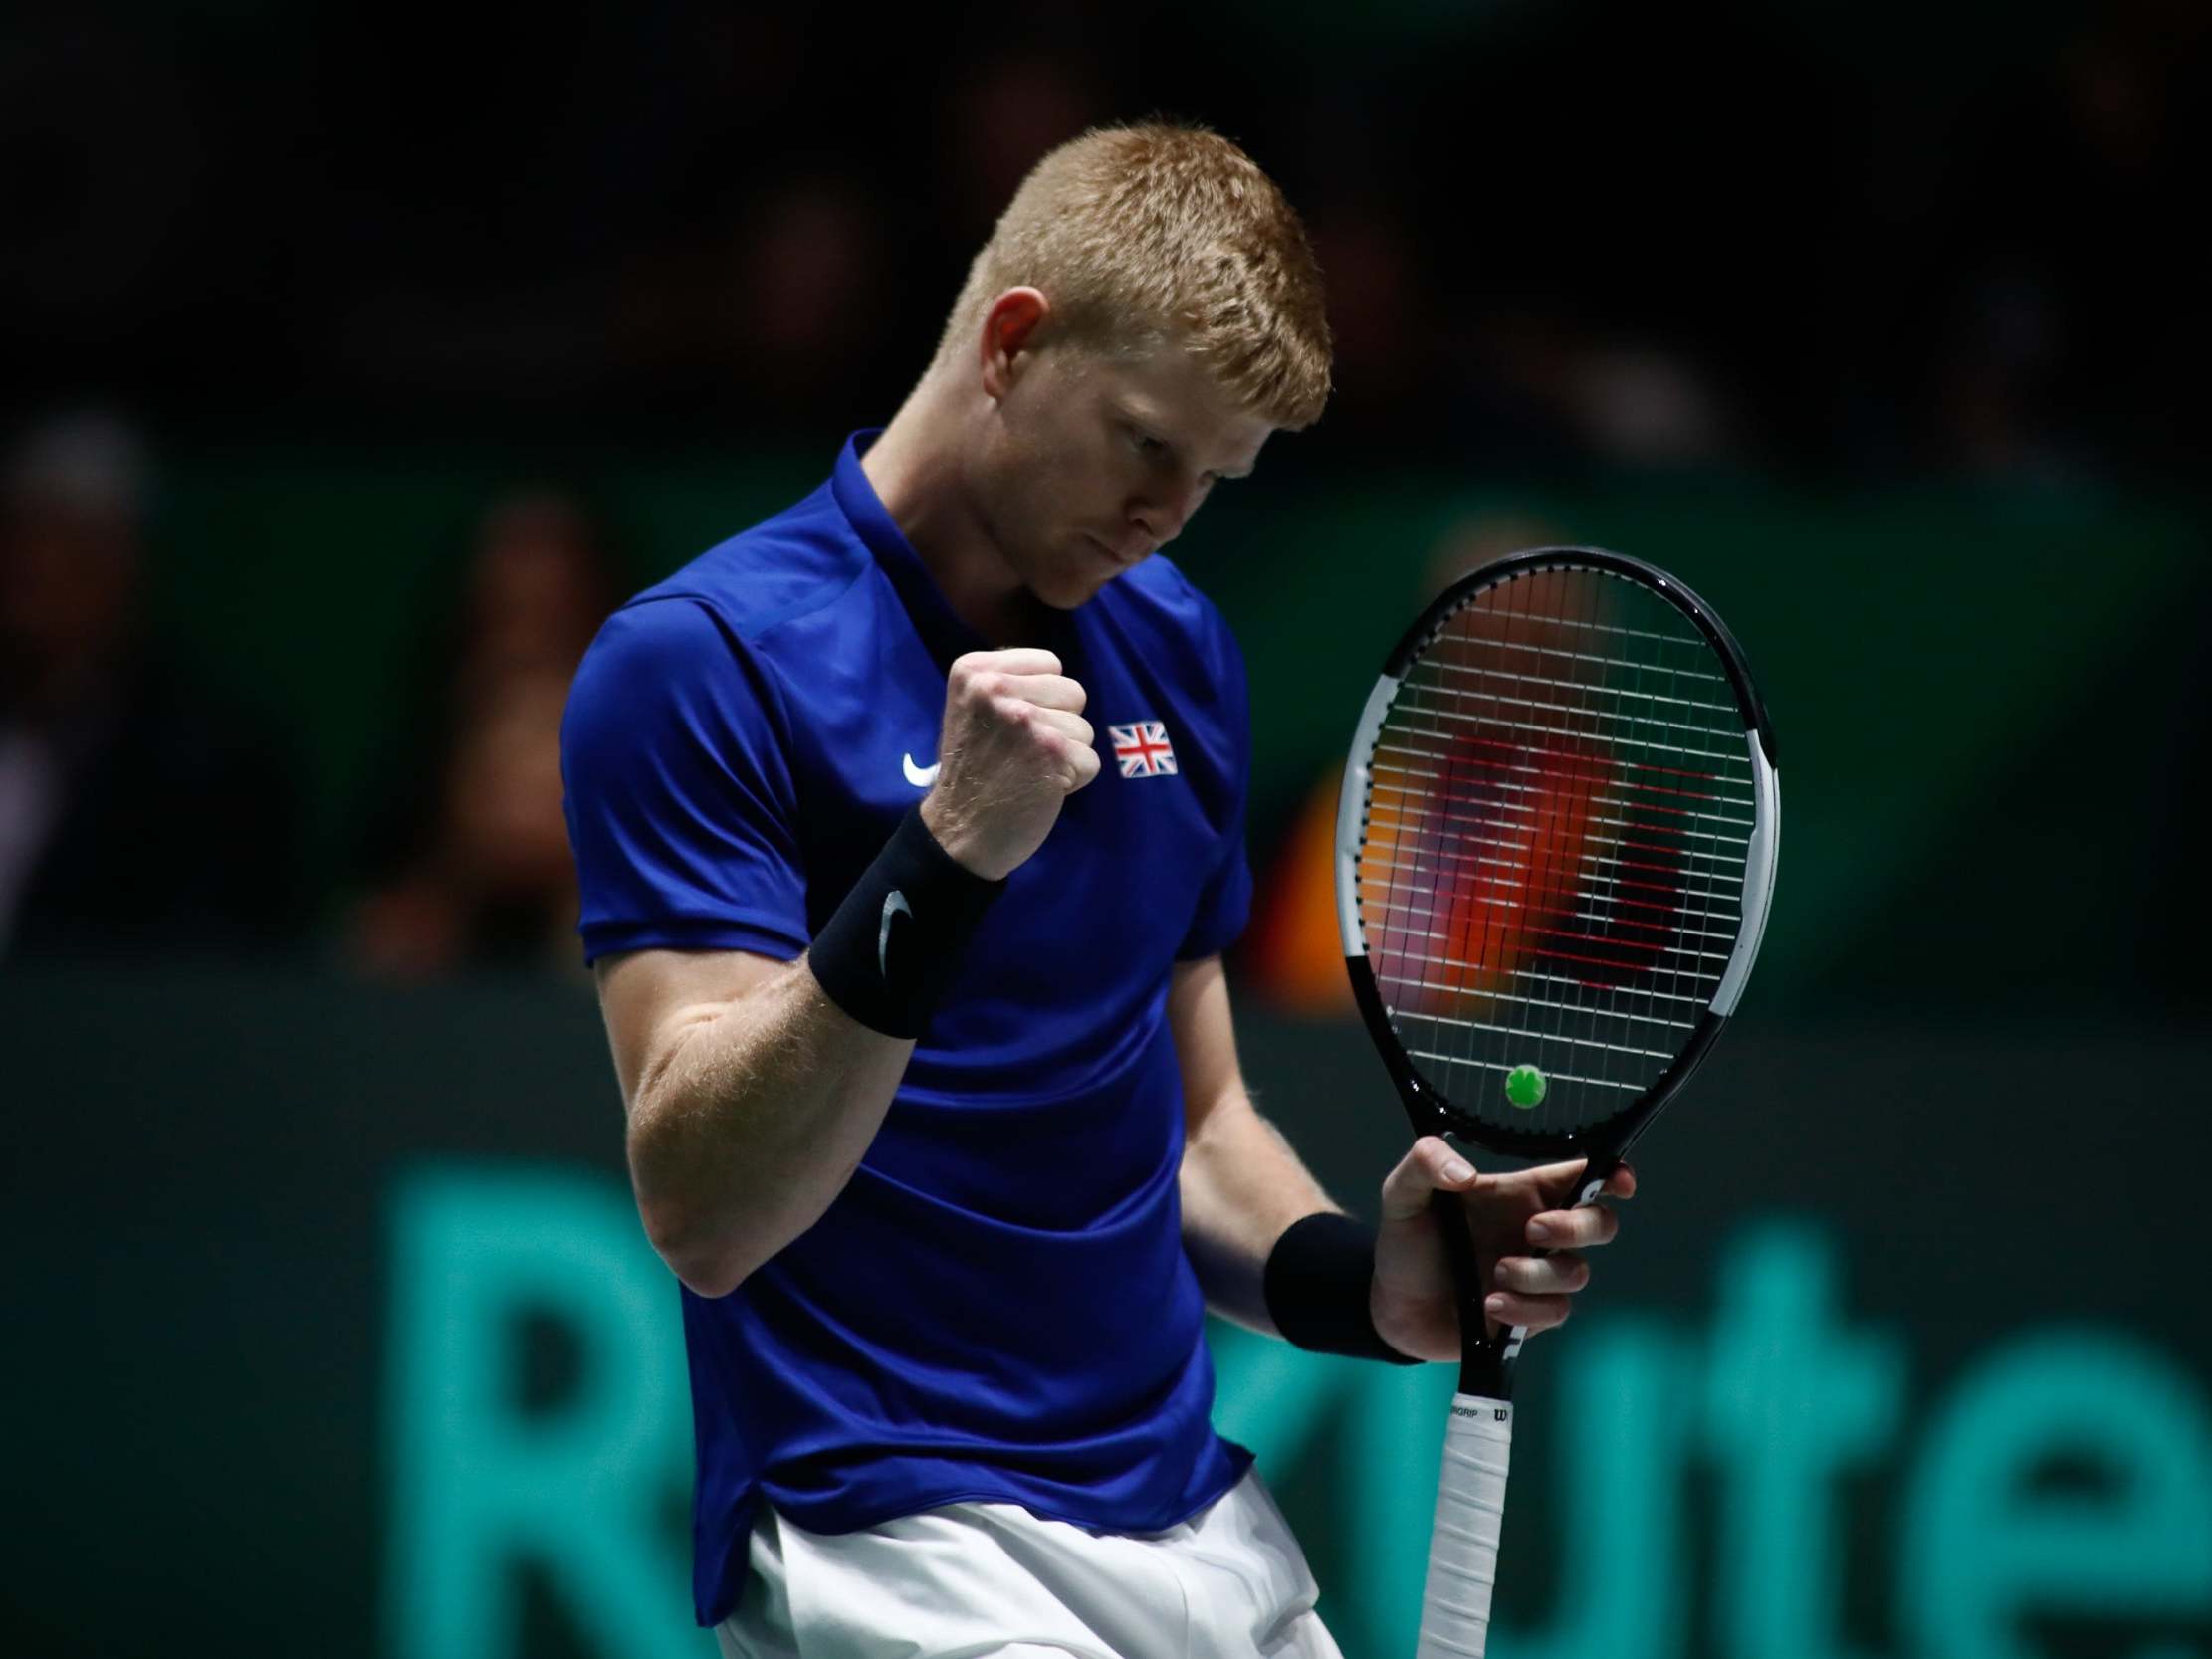 Kyle Edmund defeated Feliciano Lopez in the first singles match